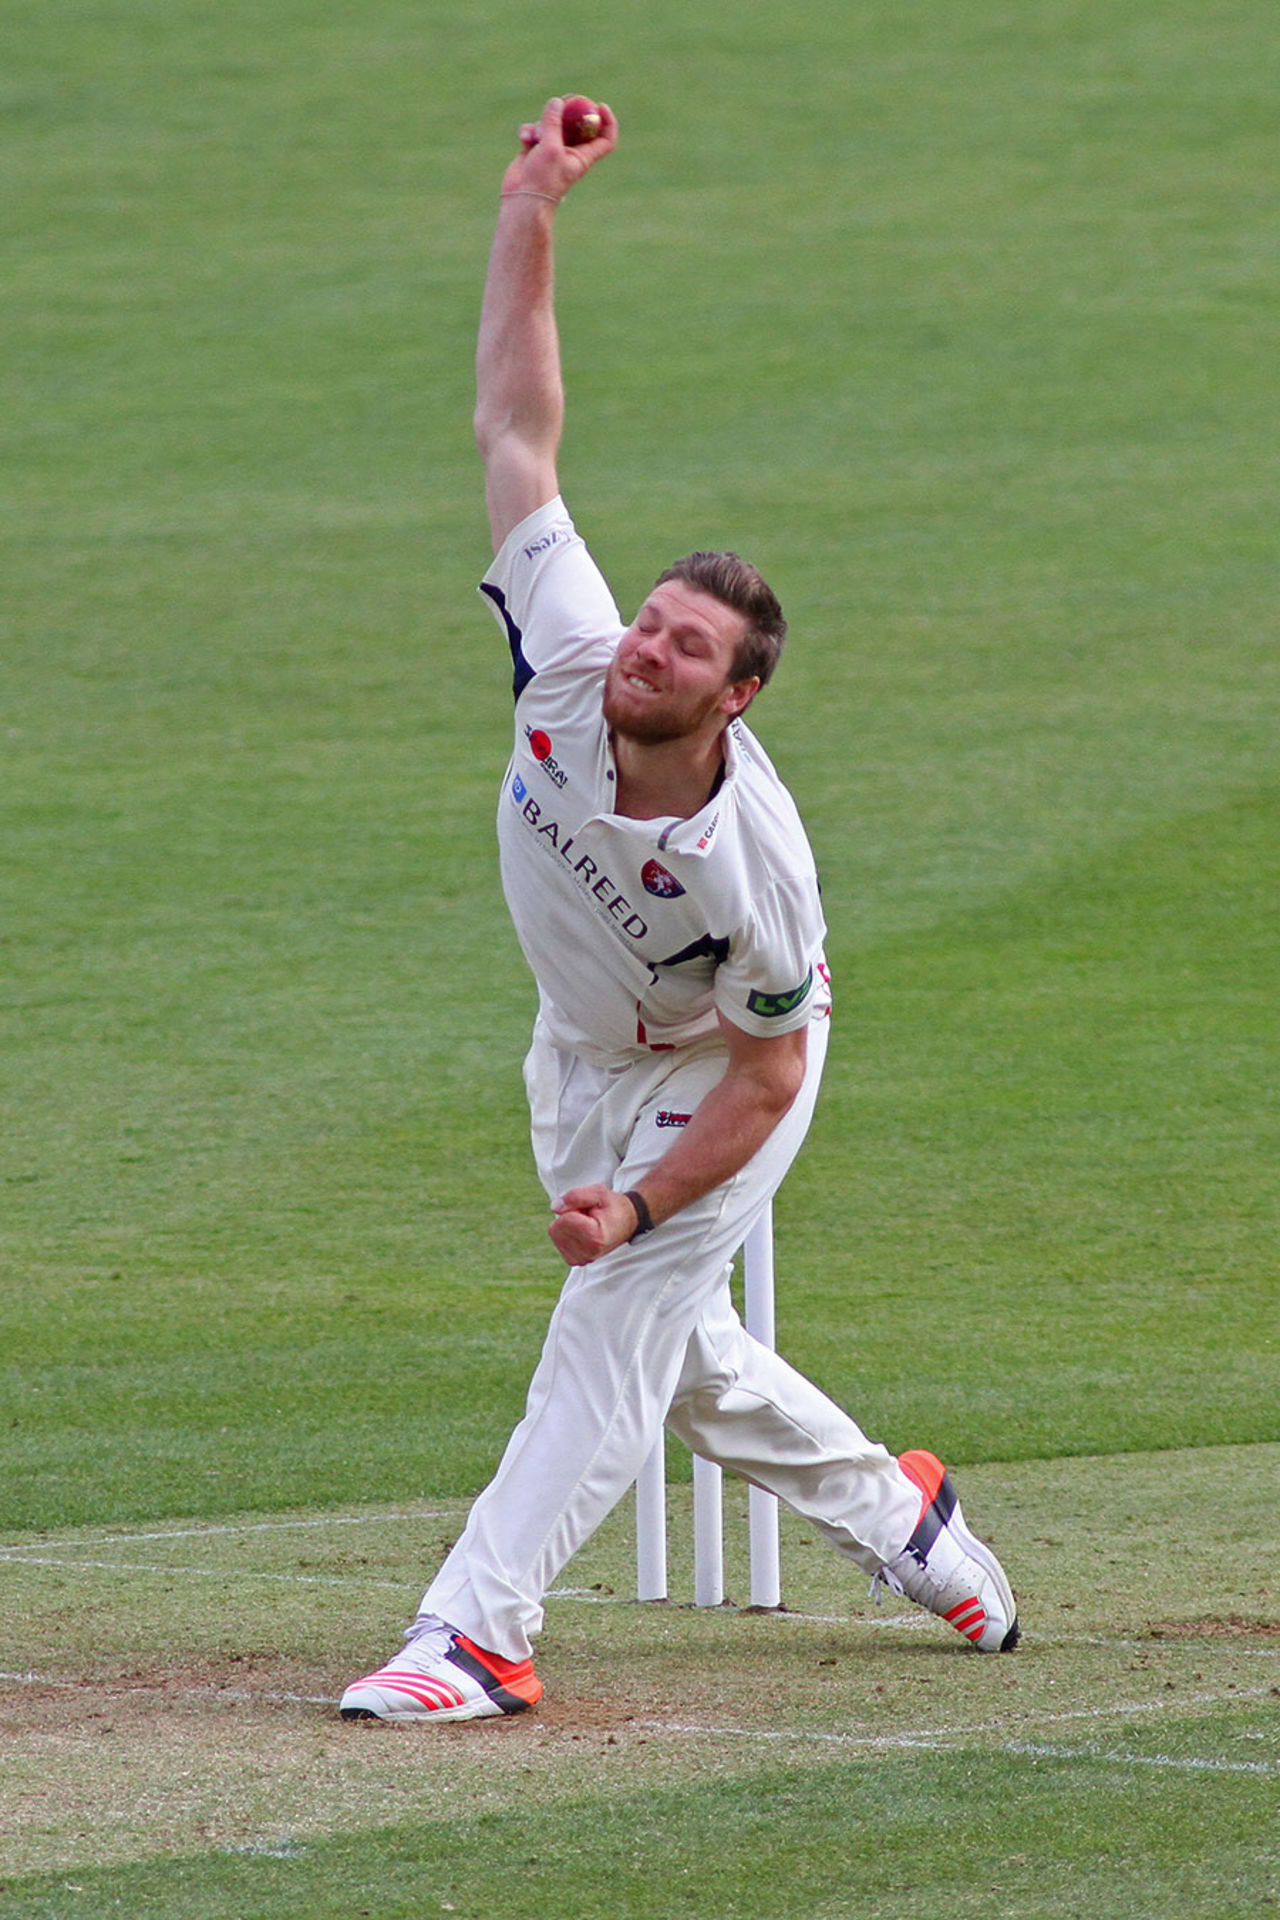 Matt Coles is back with Kent for 2015, April 19, 2015